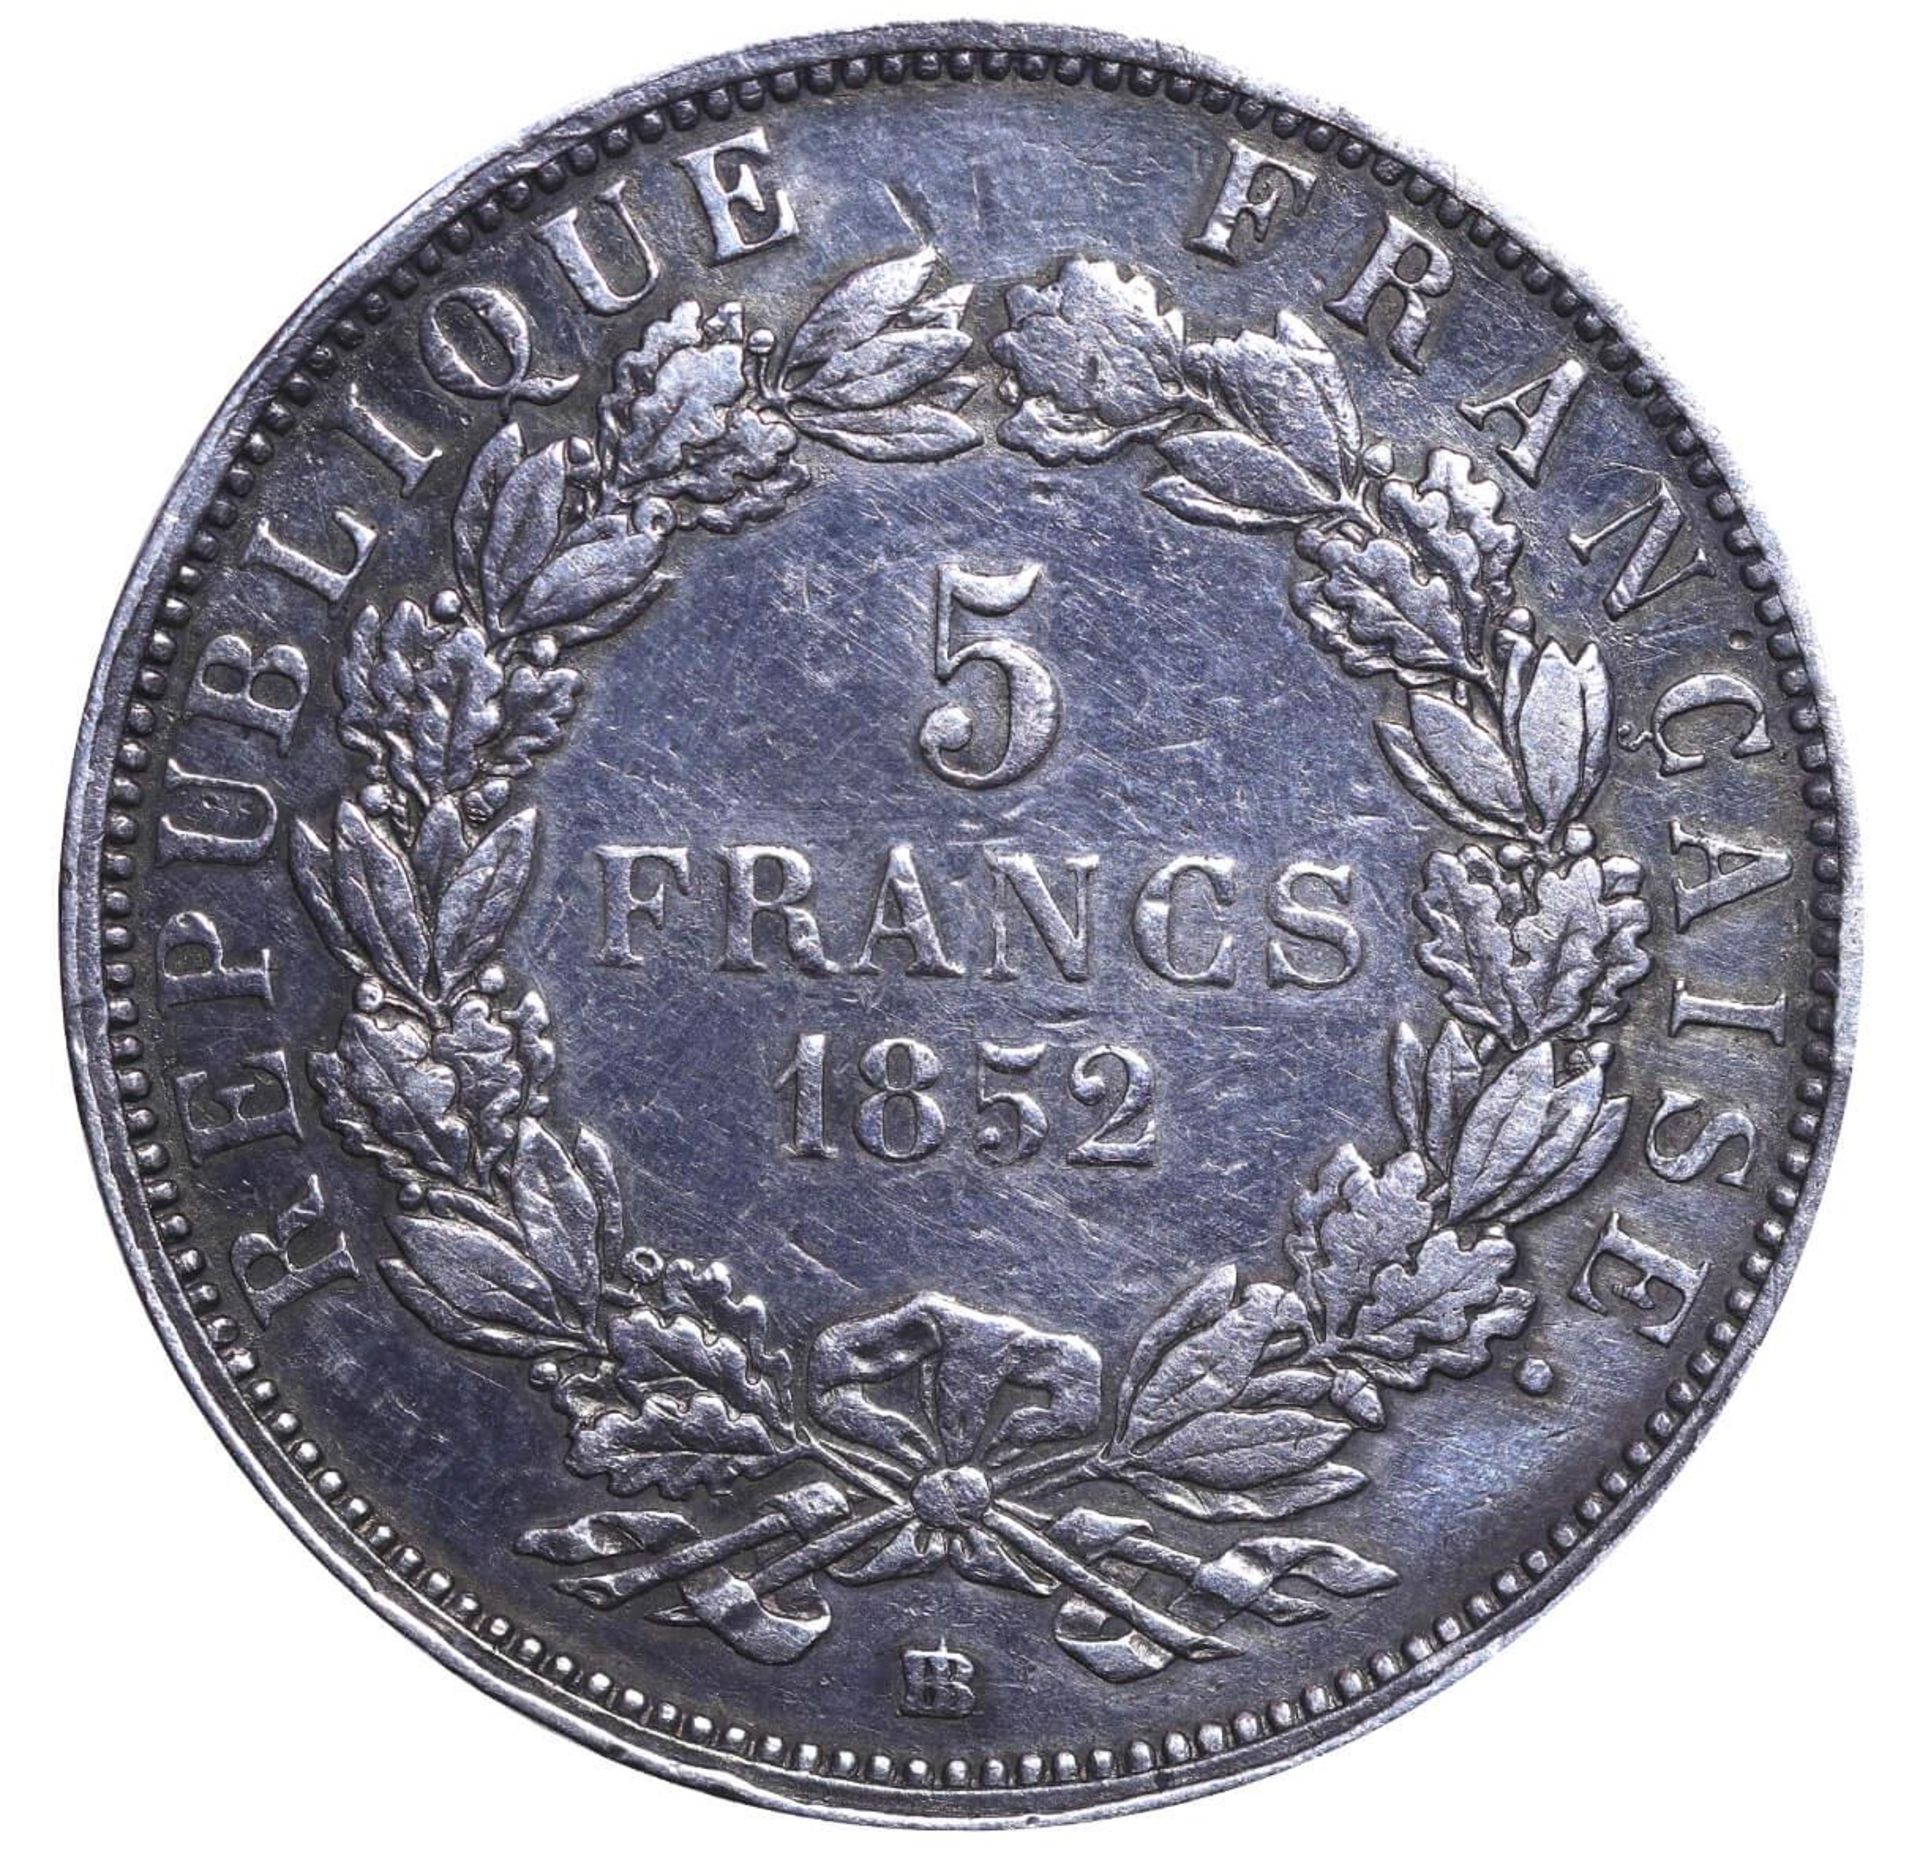 France, 5 Francs, 1852 year, BB - Image 2 of 3